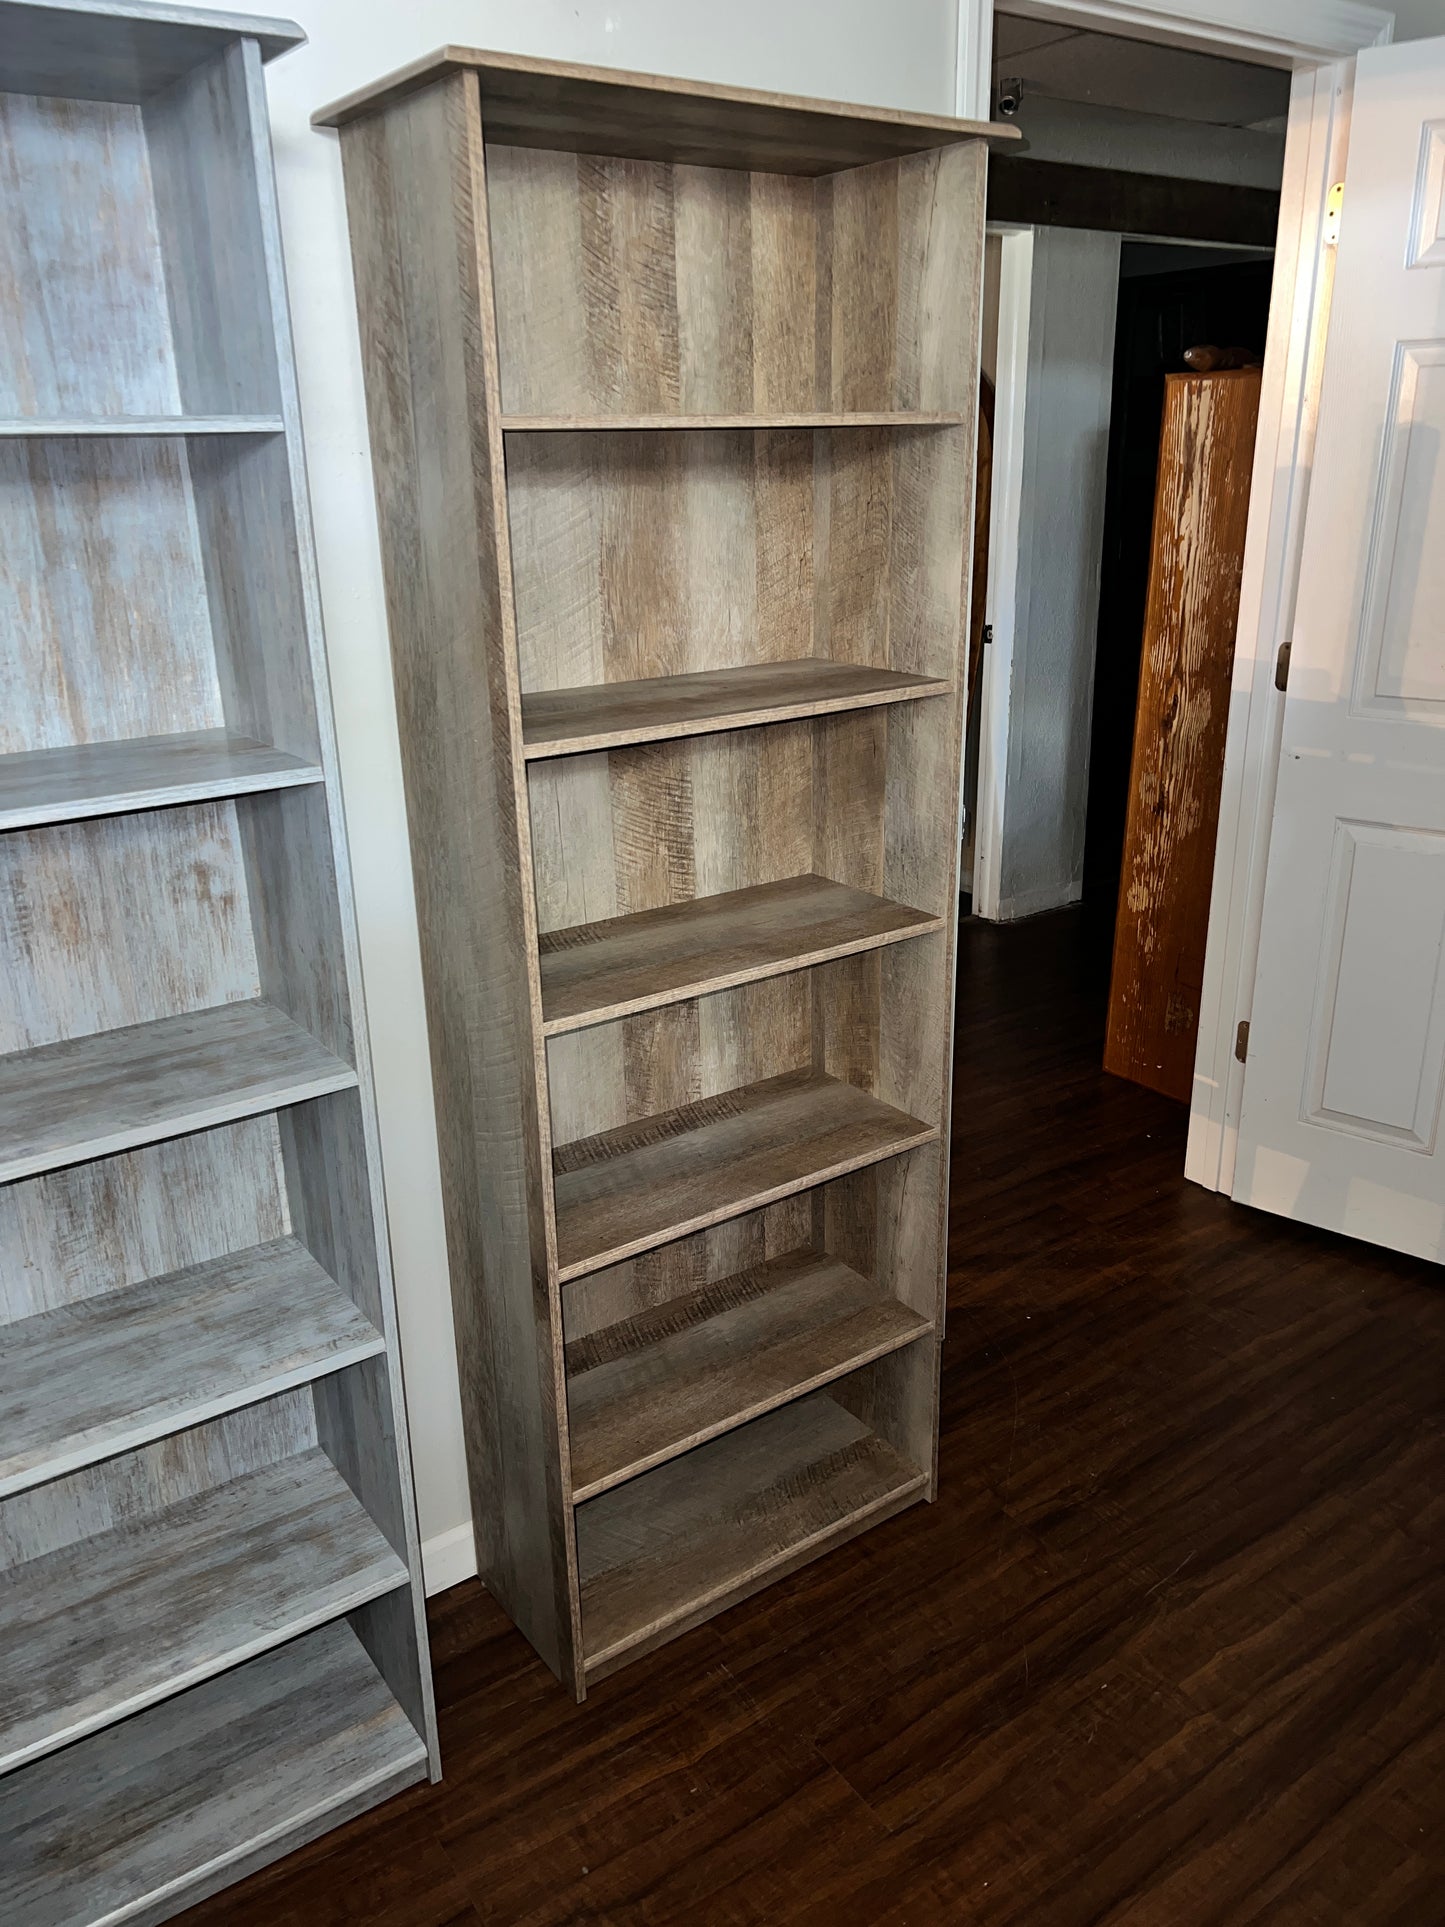 Brand new Made in USA 6' Bookcase = Pick a color